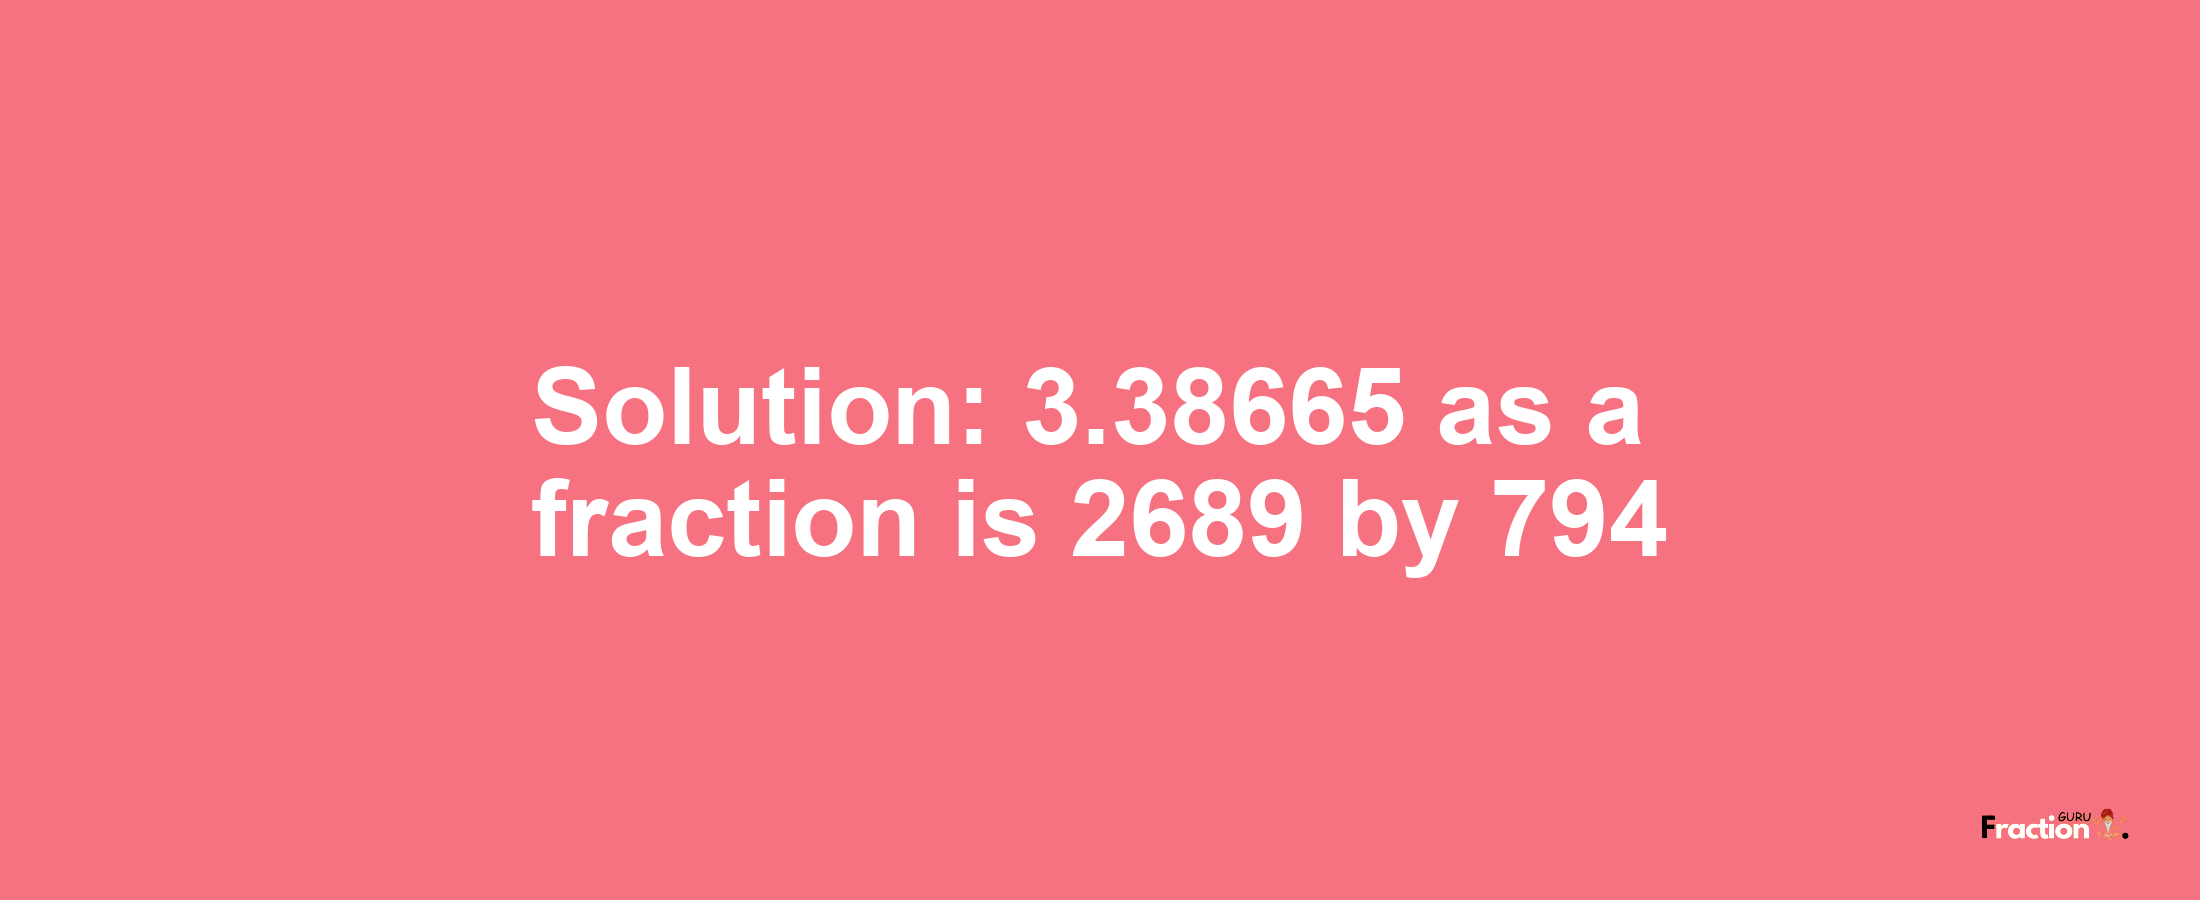 Solution:3.38665 as a fraction is 2689/794